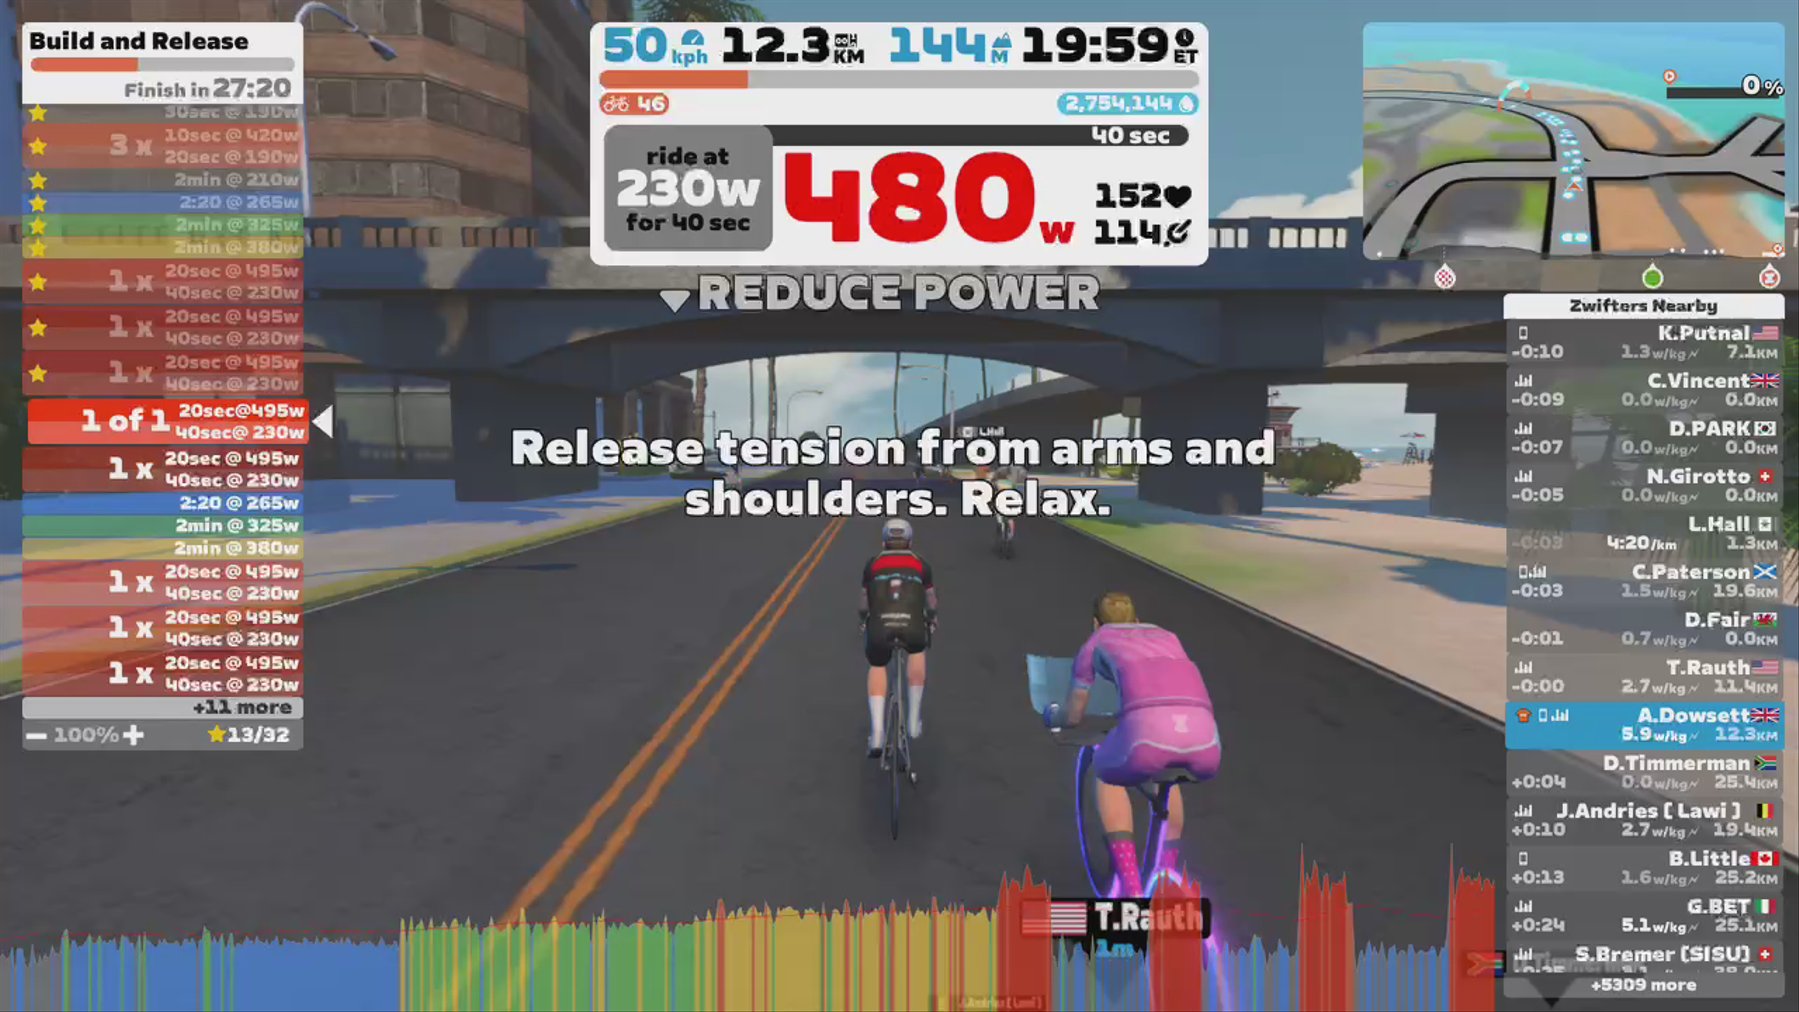 Zwift - Workout of the Week | Build and Release in Watopia